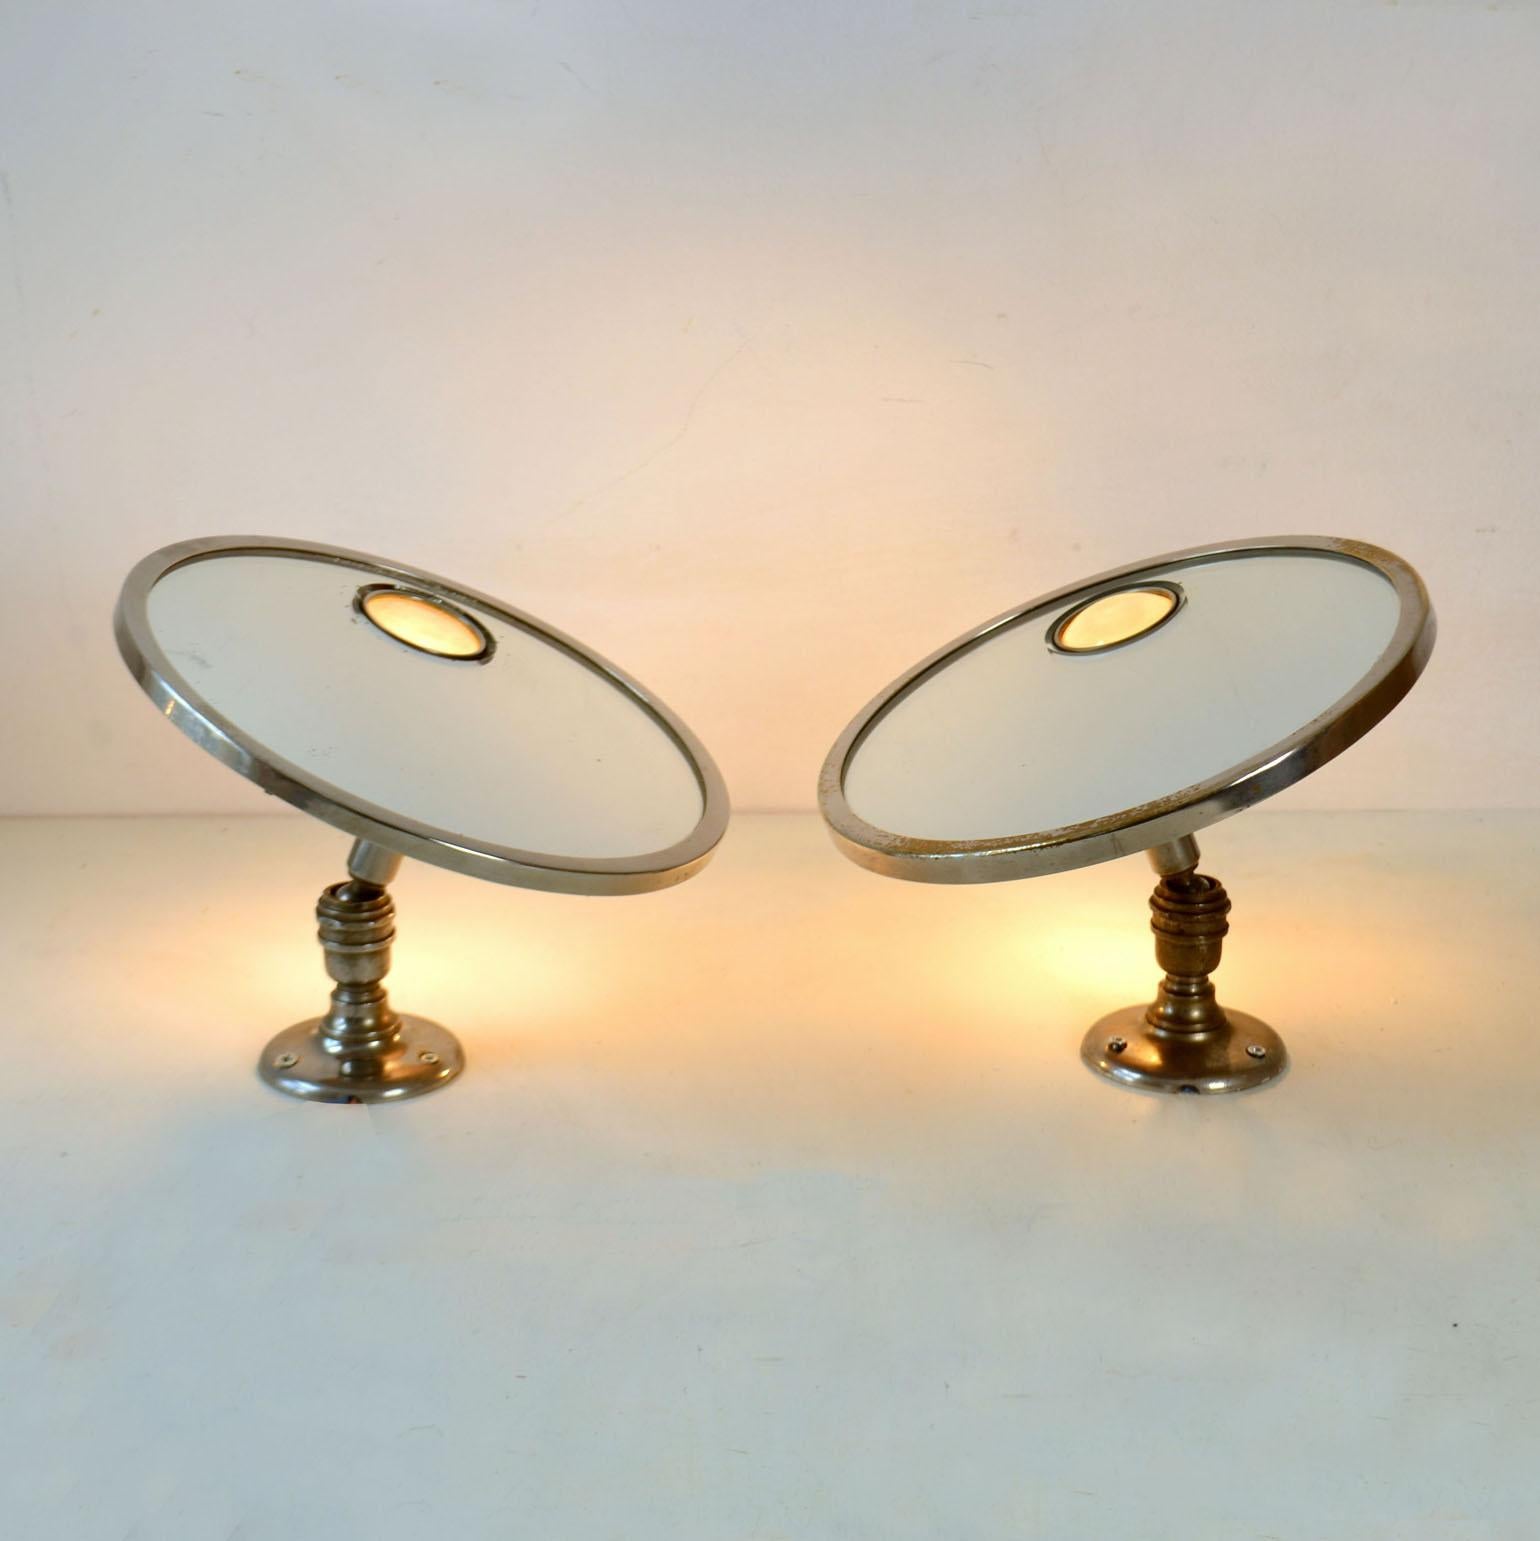 A pair of Brot Mirophar adjustable wall vanity mirrors with nickel plated frame and illuminated glass was created from 1927. The innovation of the Brot was the concept of an illuminated magnifying mirror with a fish-eye opaline glass. They were